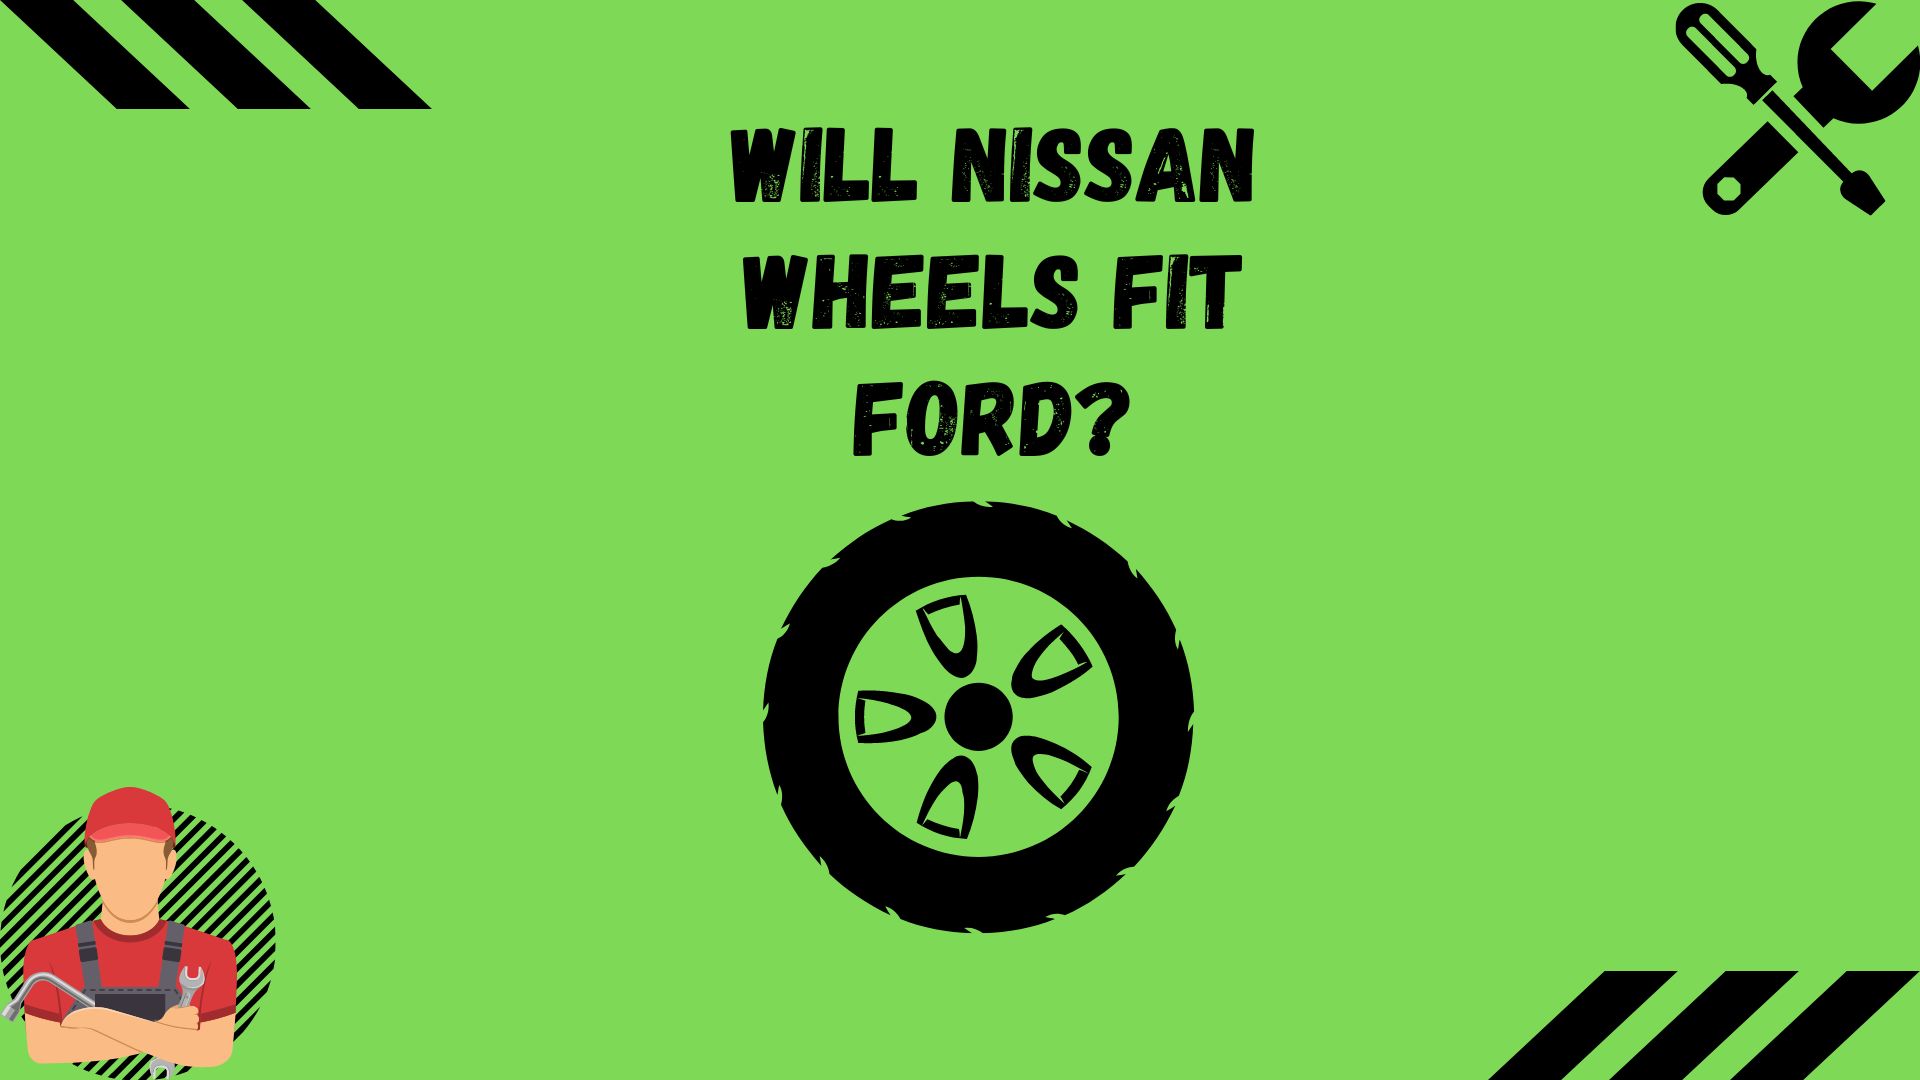 Will Nissan Wheels Fit Ford